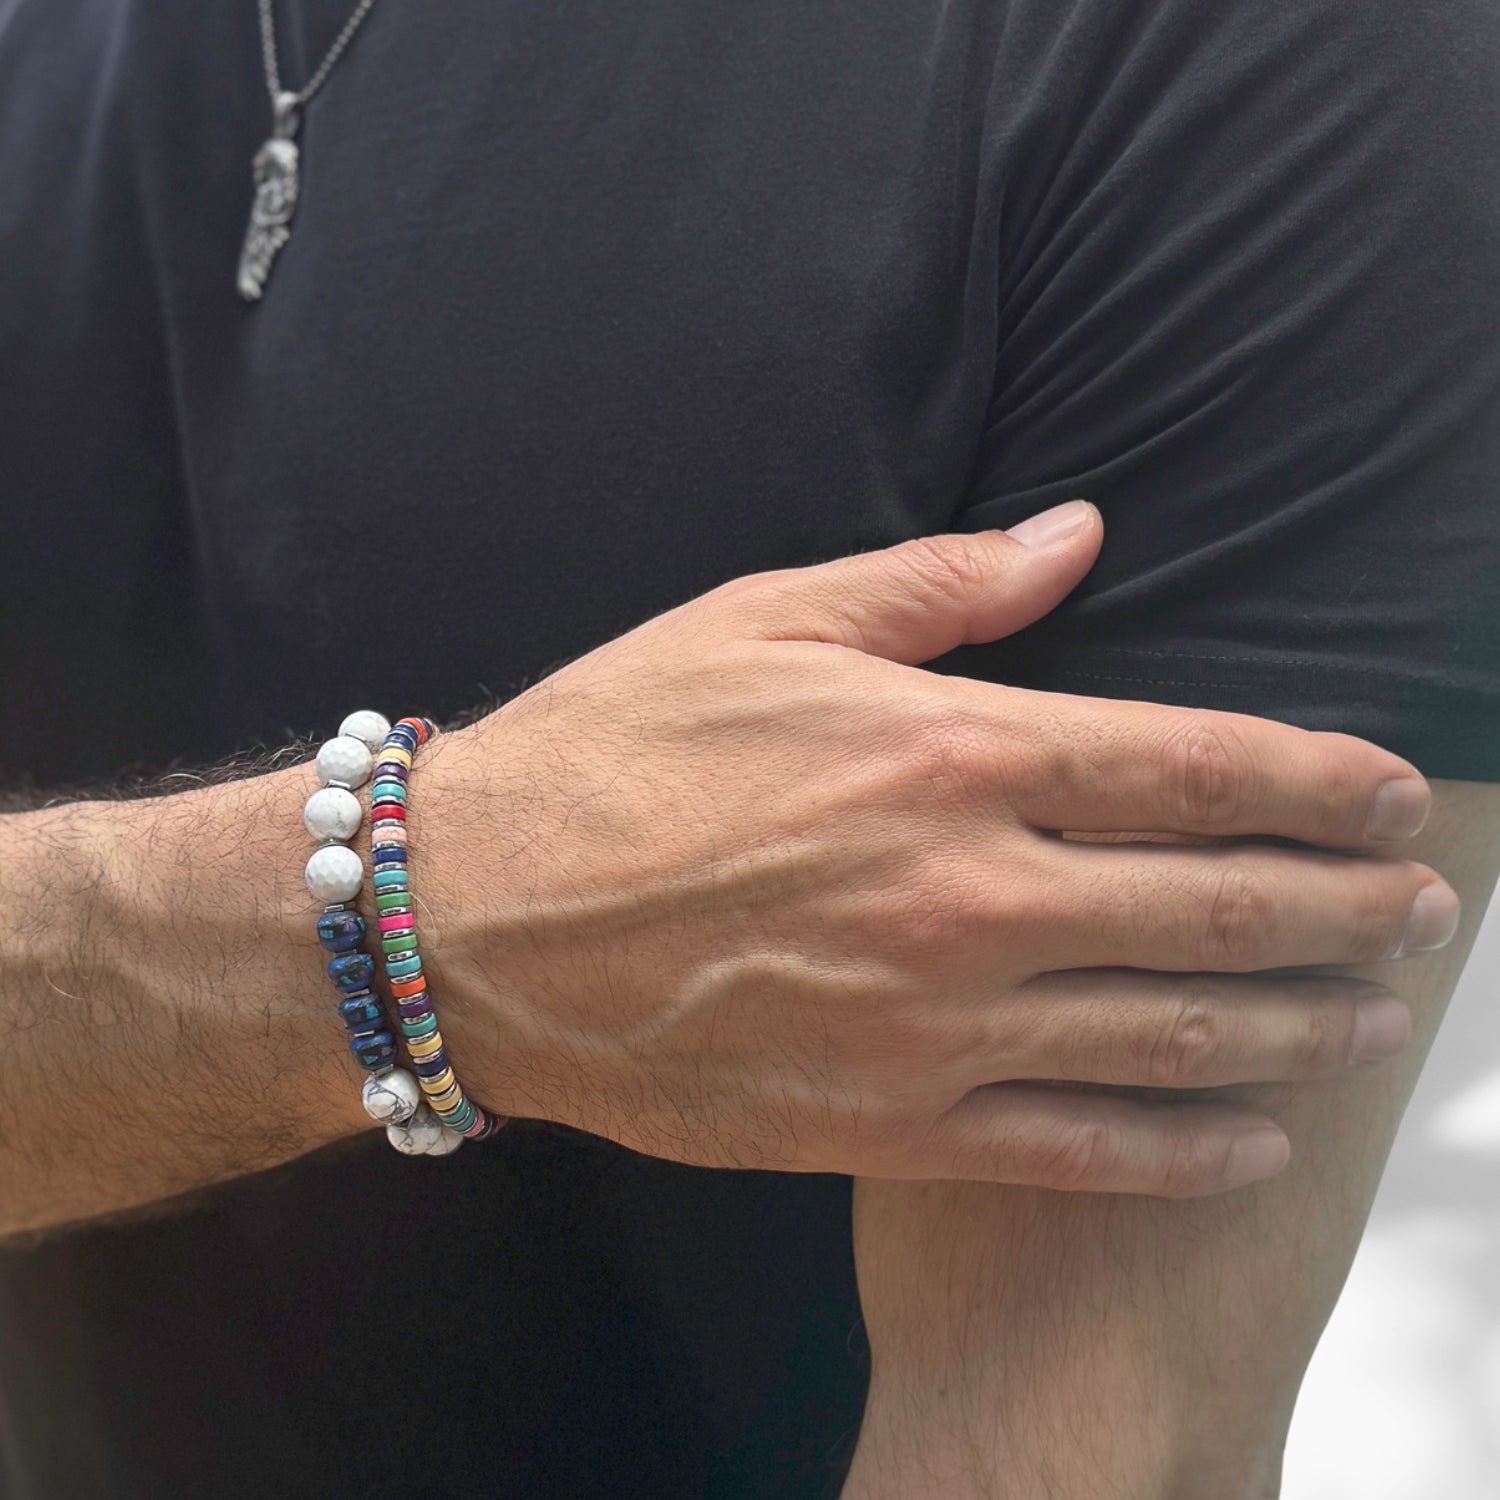 Men's White Howlite and Blue Spiritual Beaded Bracelet, handcrafted for a serene and balanced look with cultural significance